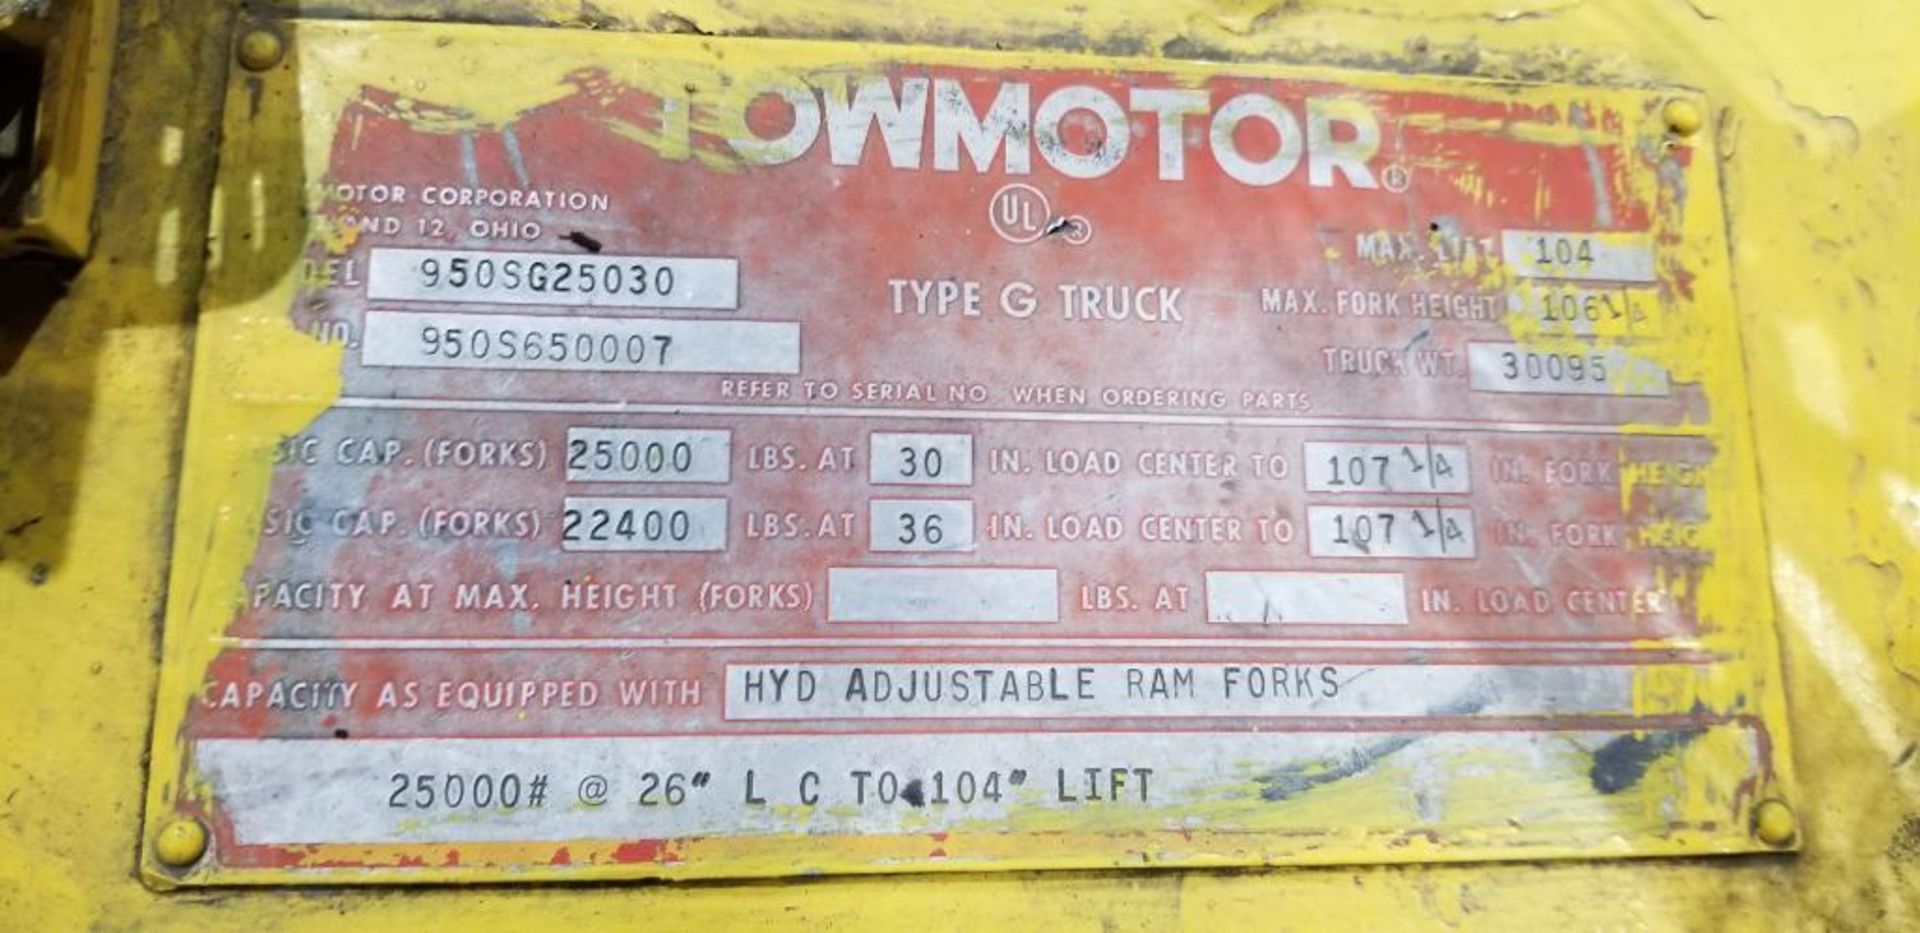 Towmotor Forklift Truck, Model 950SG25030, S/N 950S650007, LPG, 25,000 LB. Capacity, 2-Stage Mast, 1 - Image 9 of 9